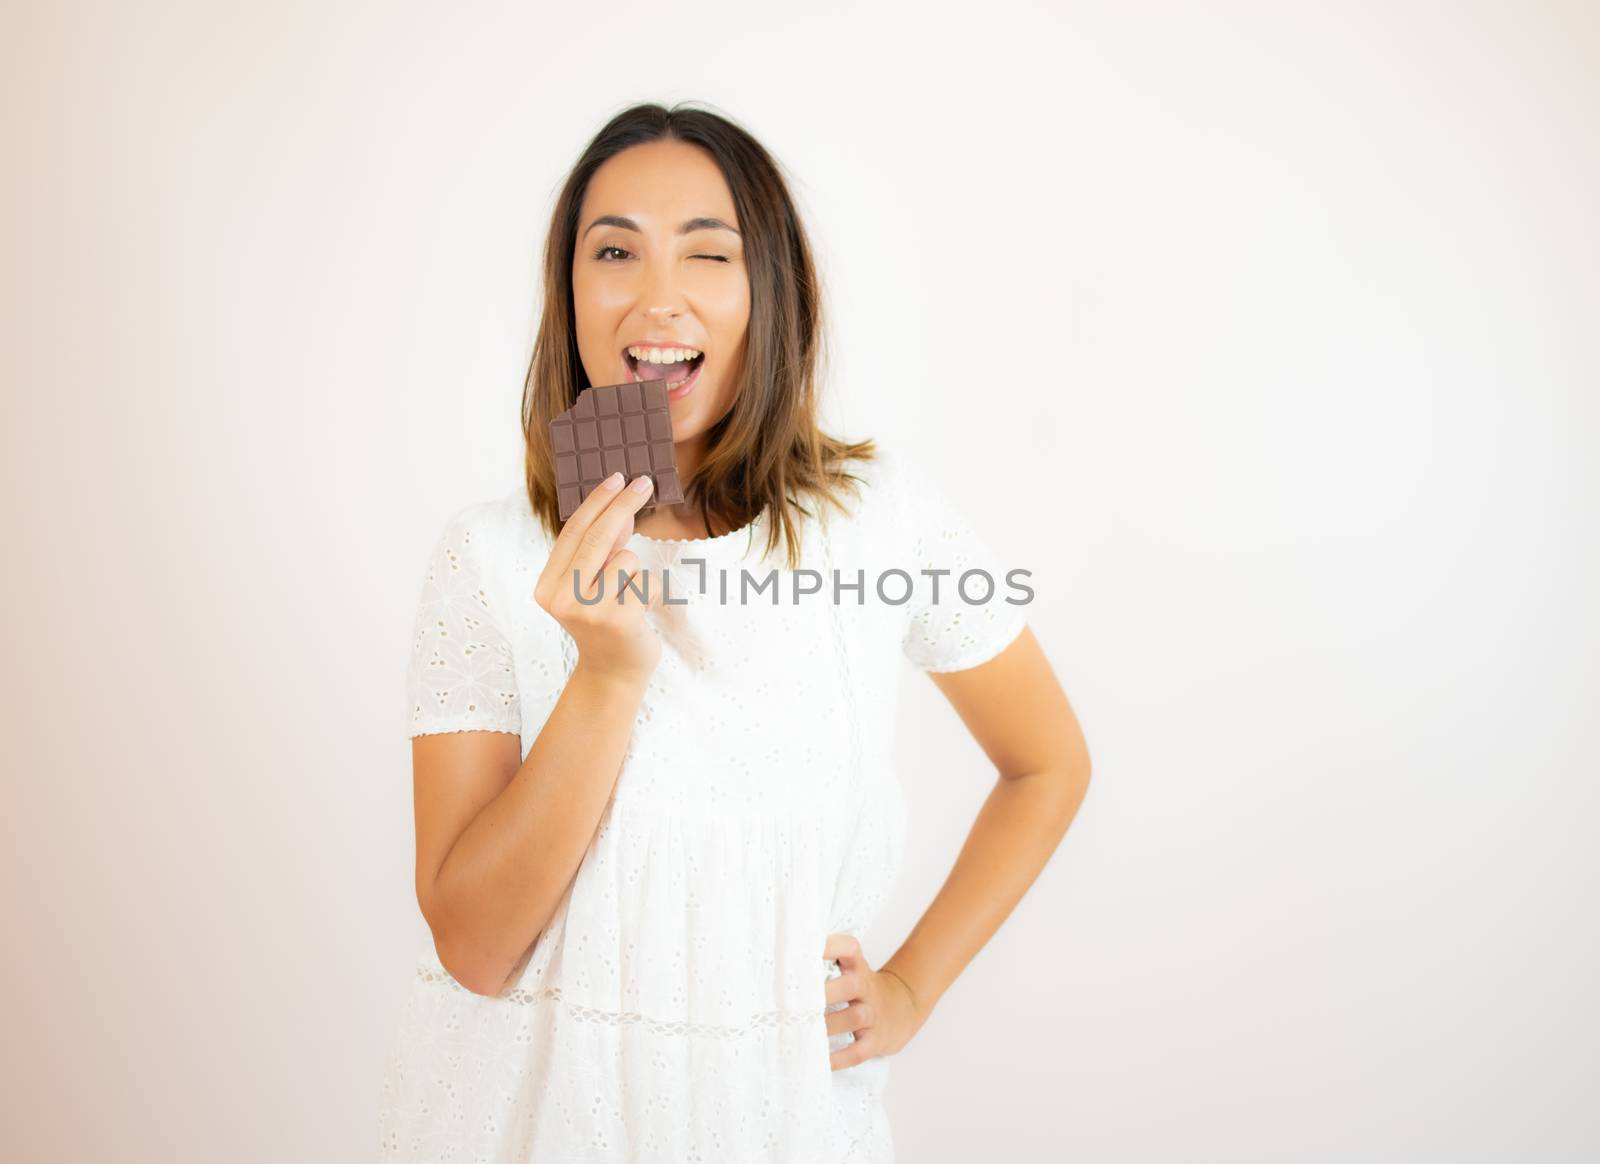 Beautiful young woman eating a piece of chocolate by lmstudio